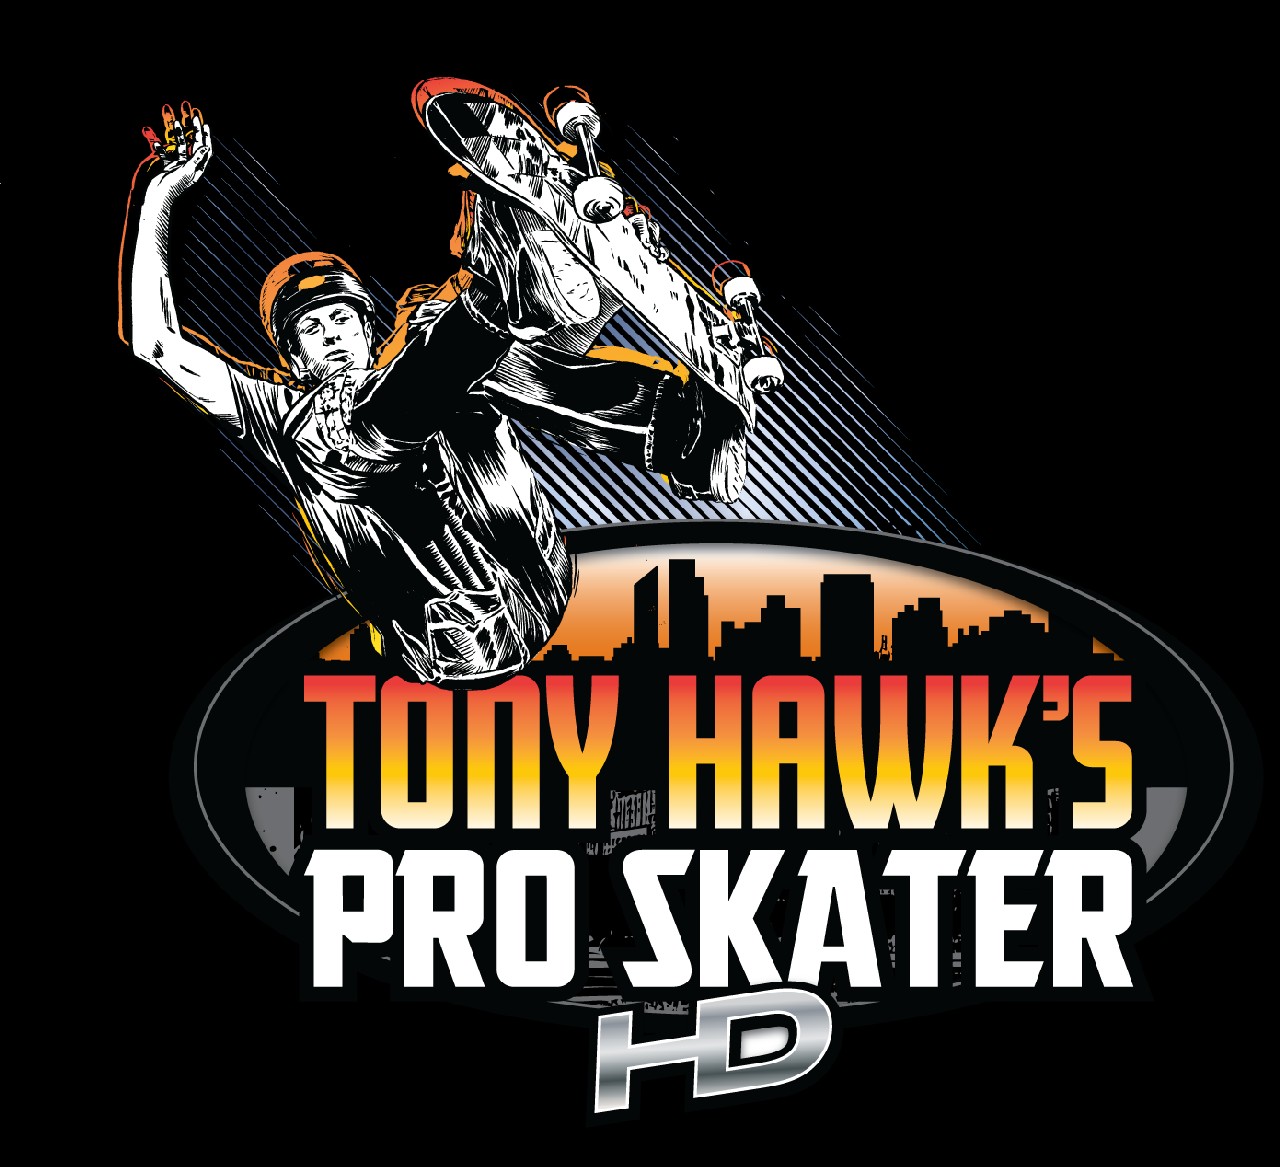 Tony Hawk's Pro Skater 1+2 Review - Air-walk to the Moon - Vamers